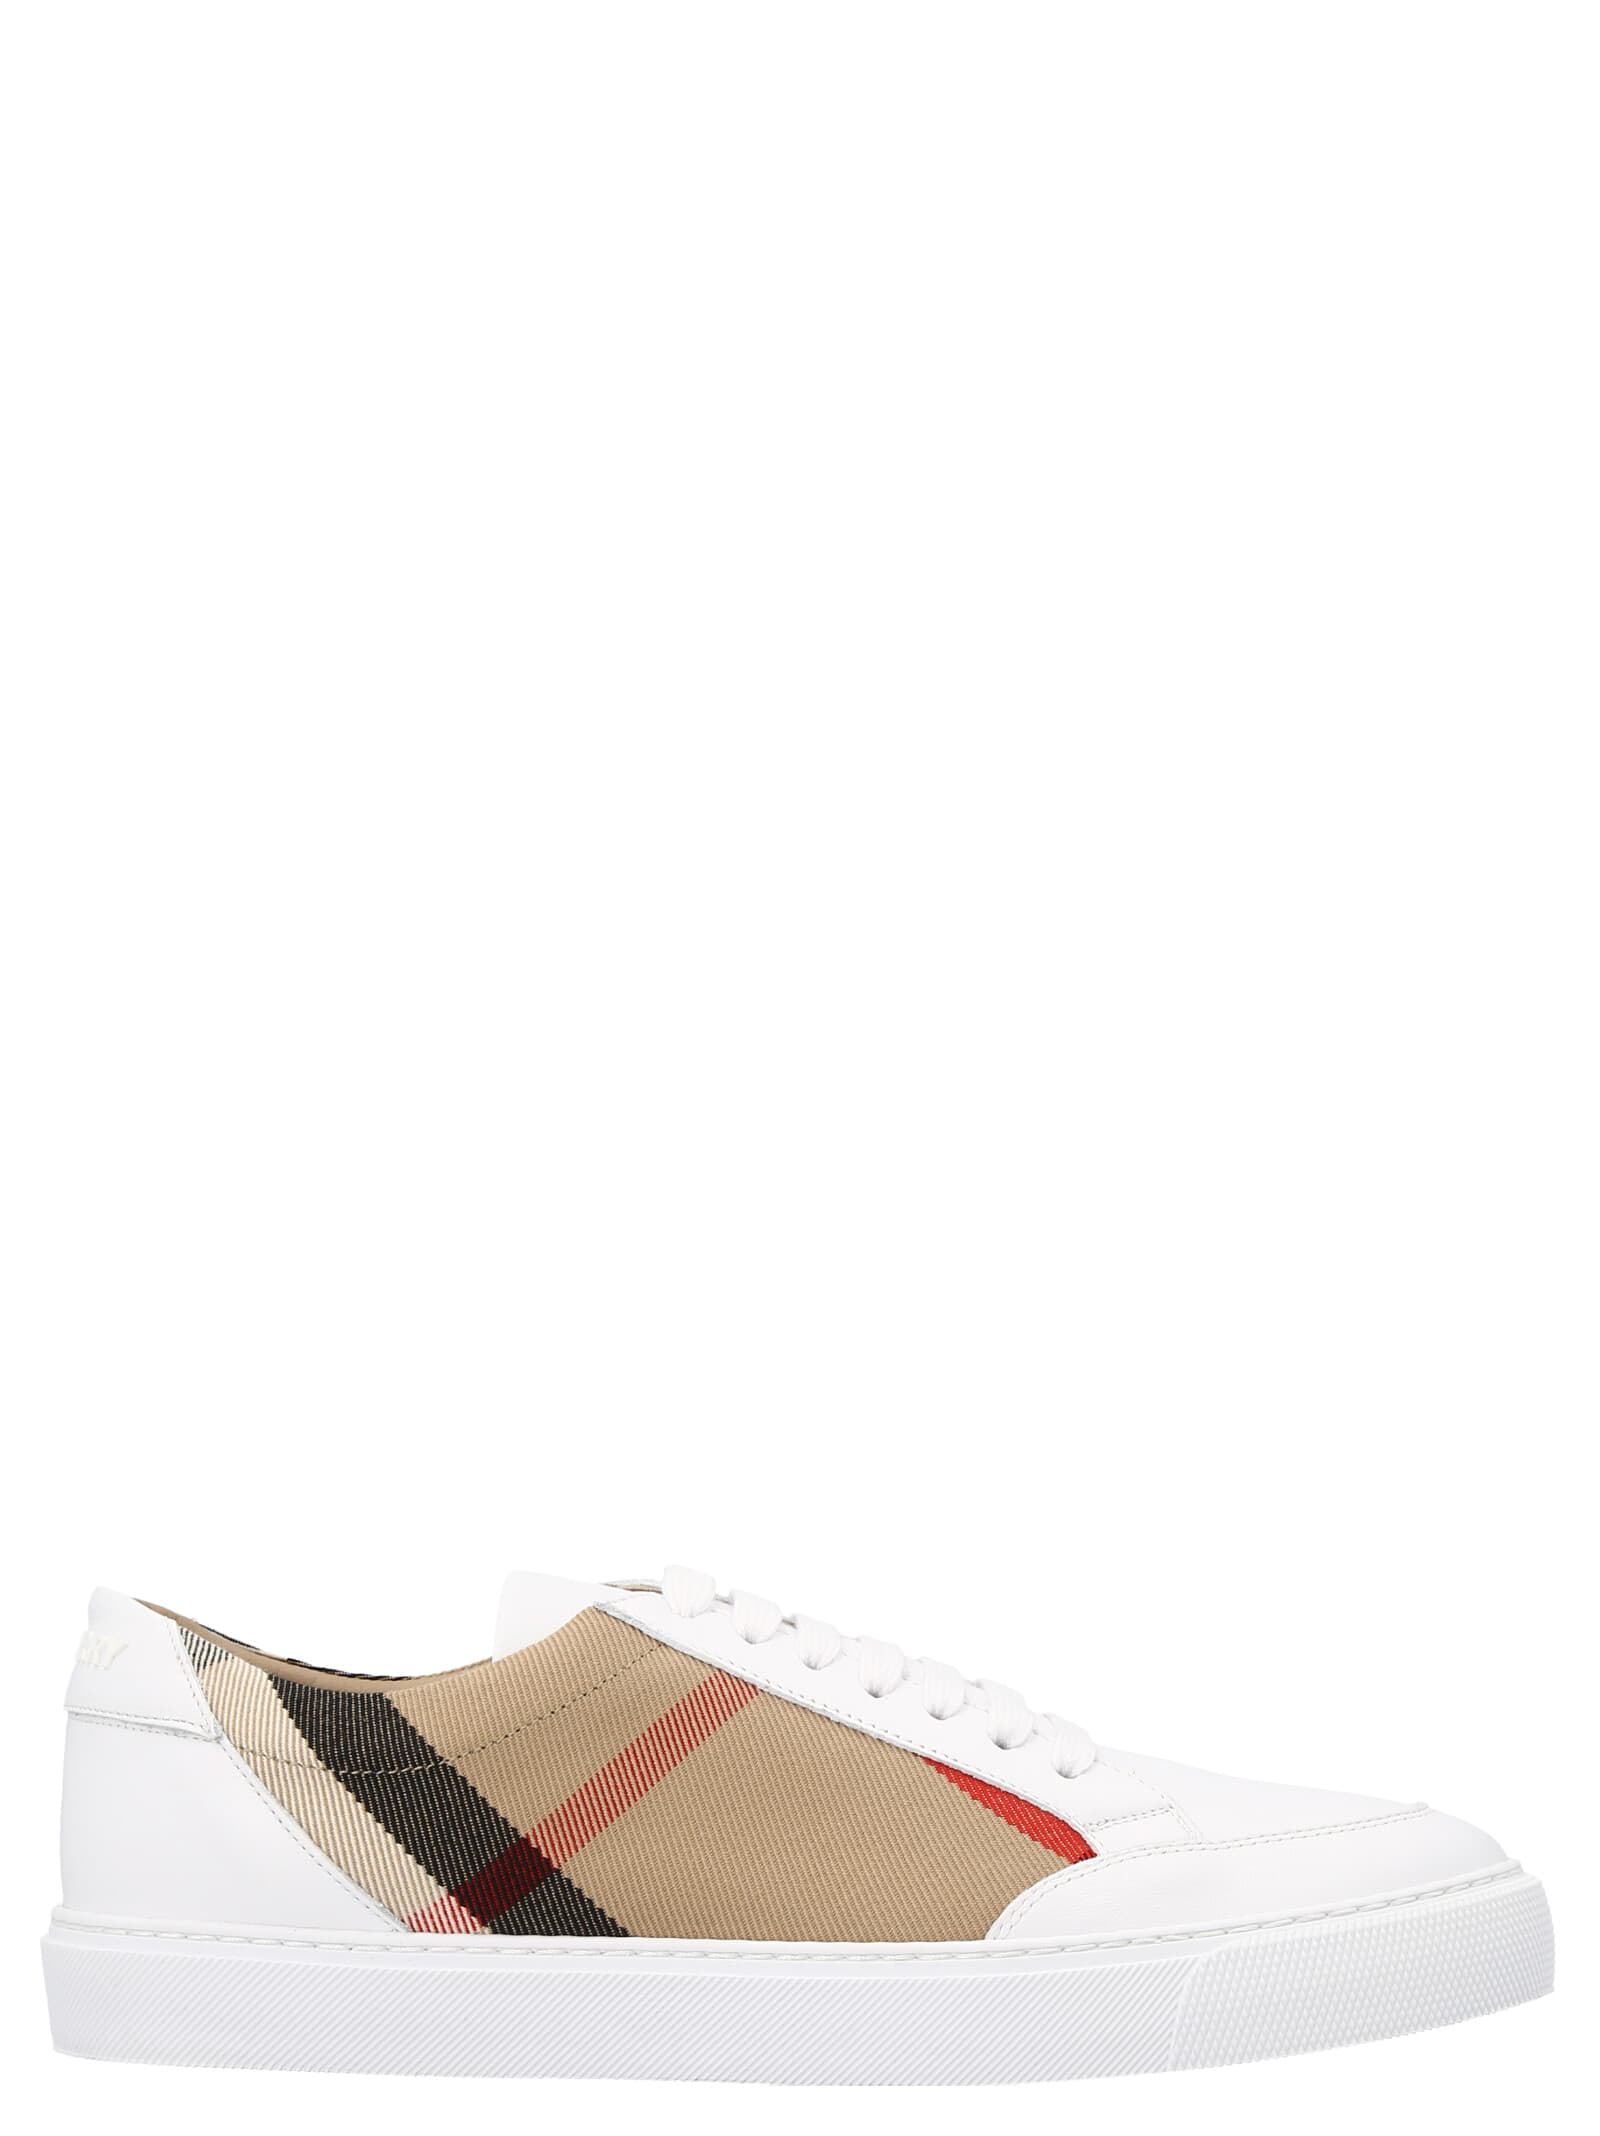 Shop Burberry New Salmond Sneakers In Multicolor